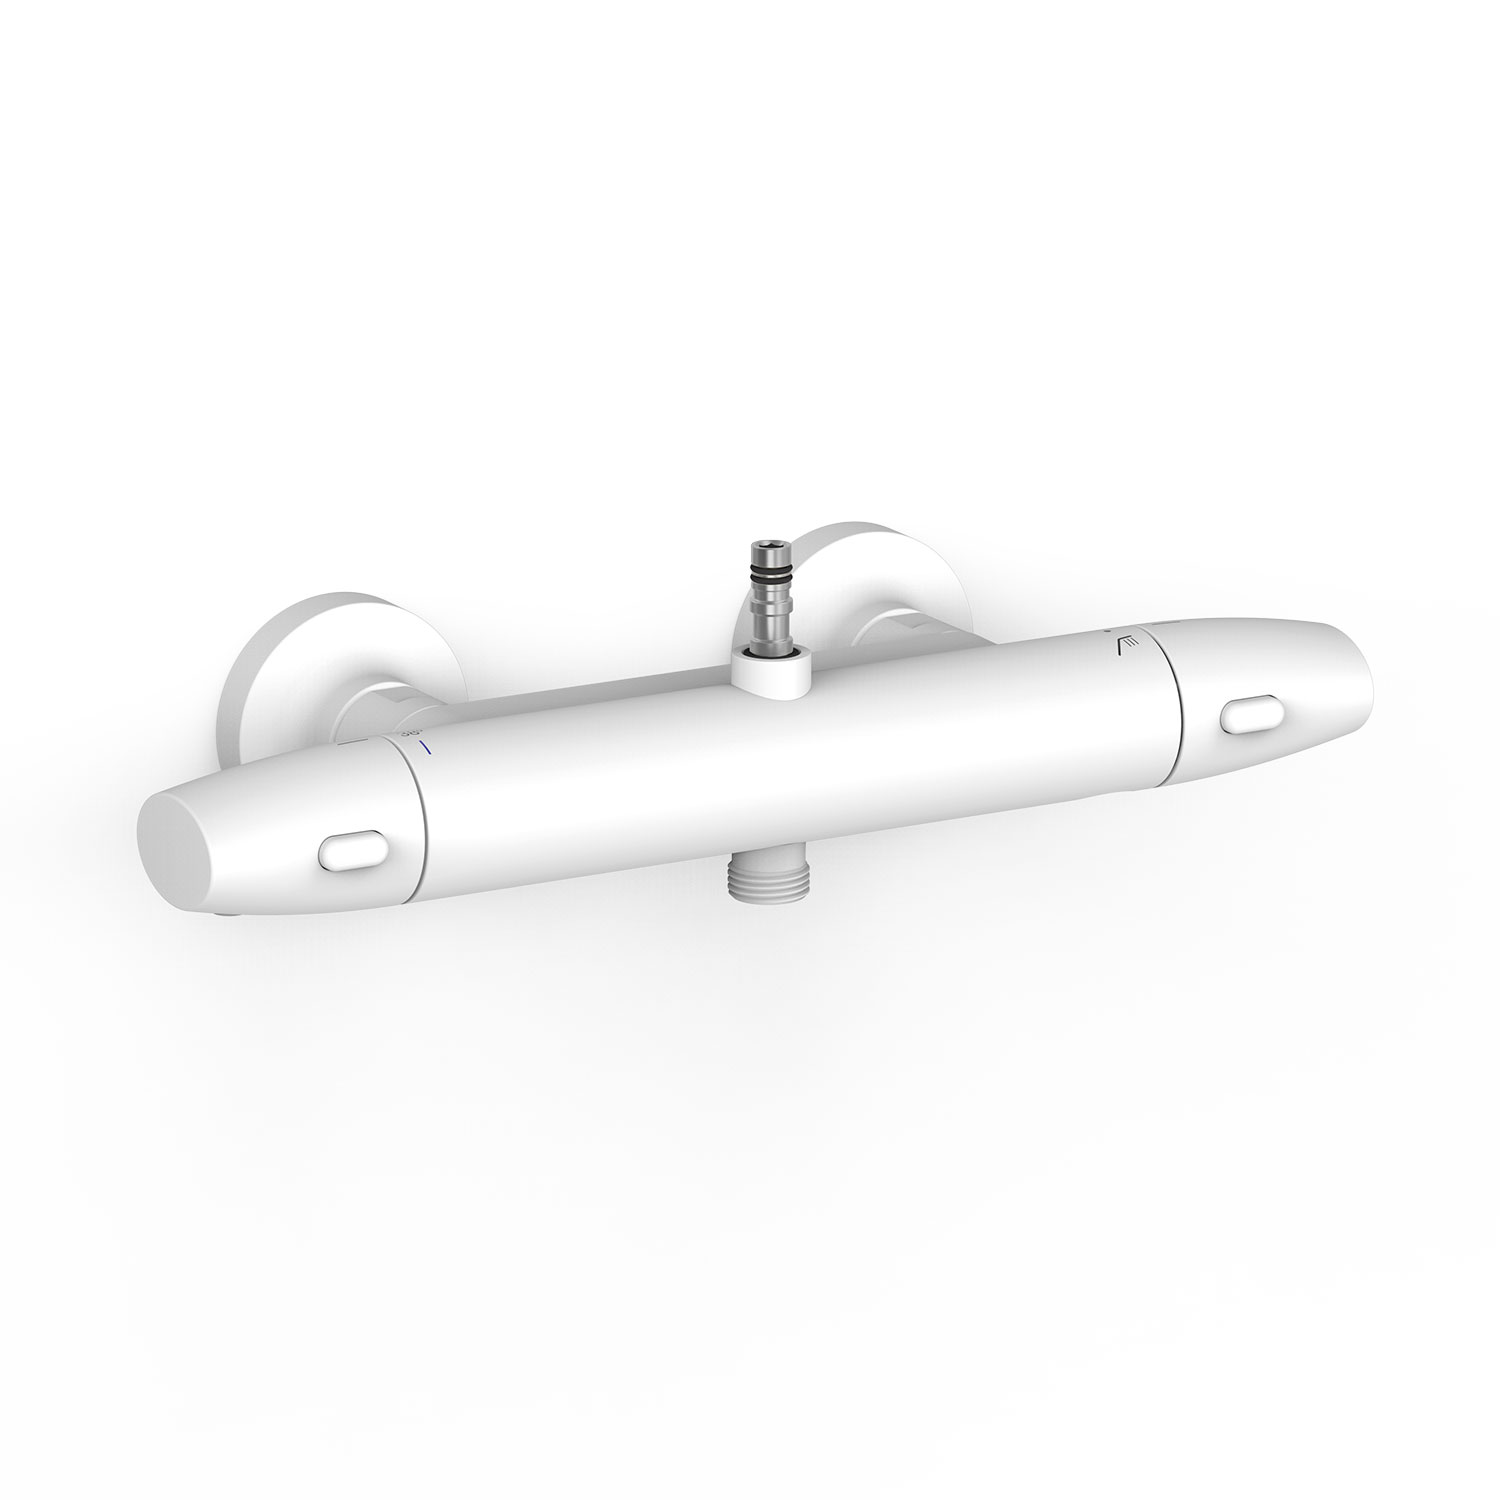 OVER-WALL 2-way Over-wall thermostatic wall tap with shower bar connection-19016903BM